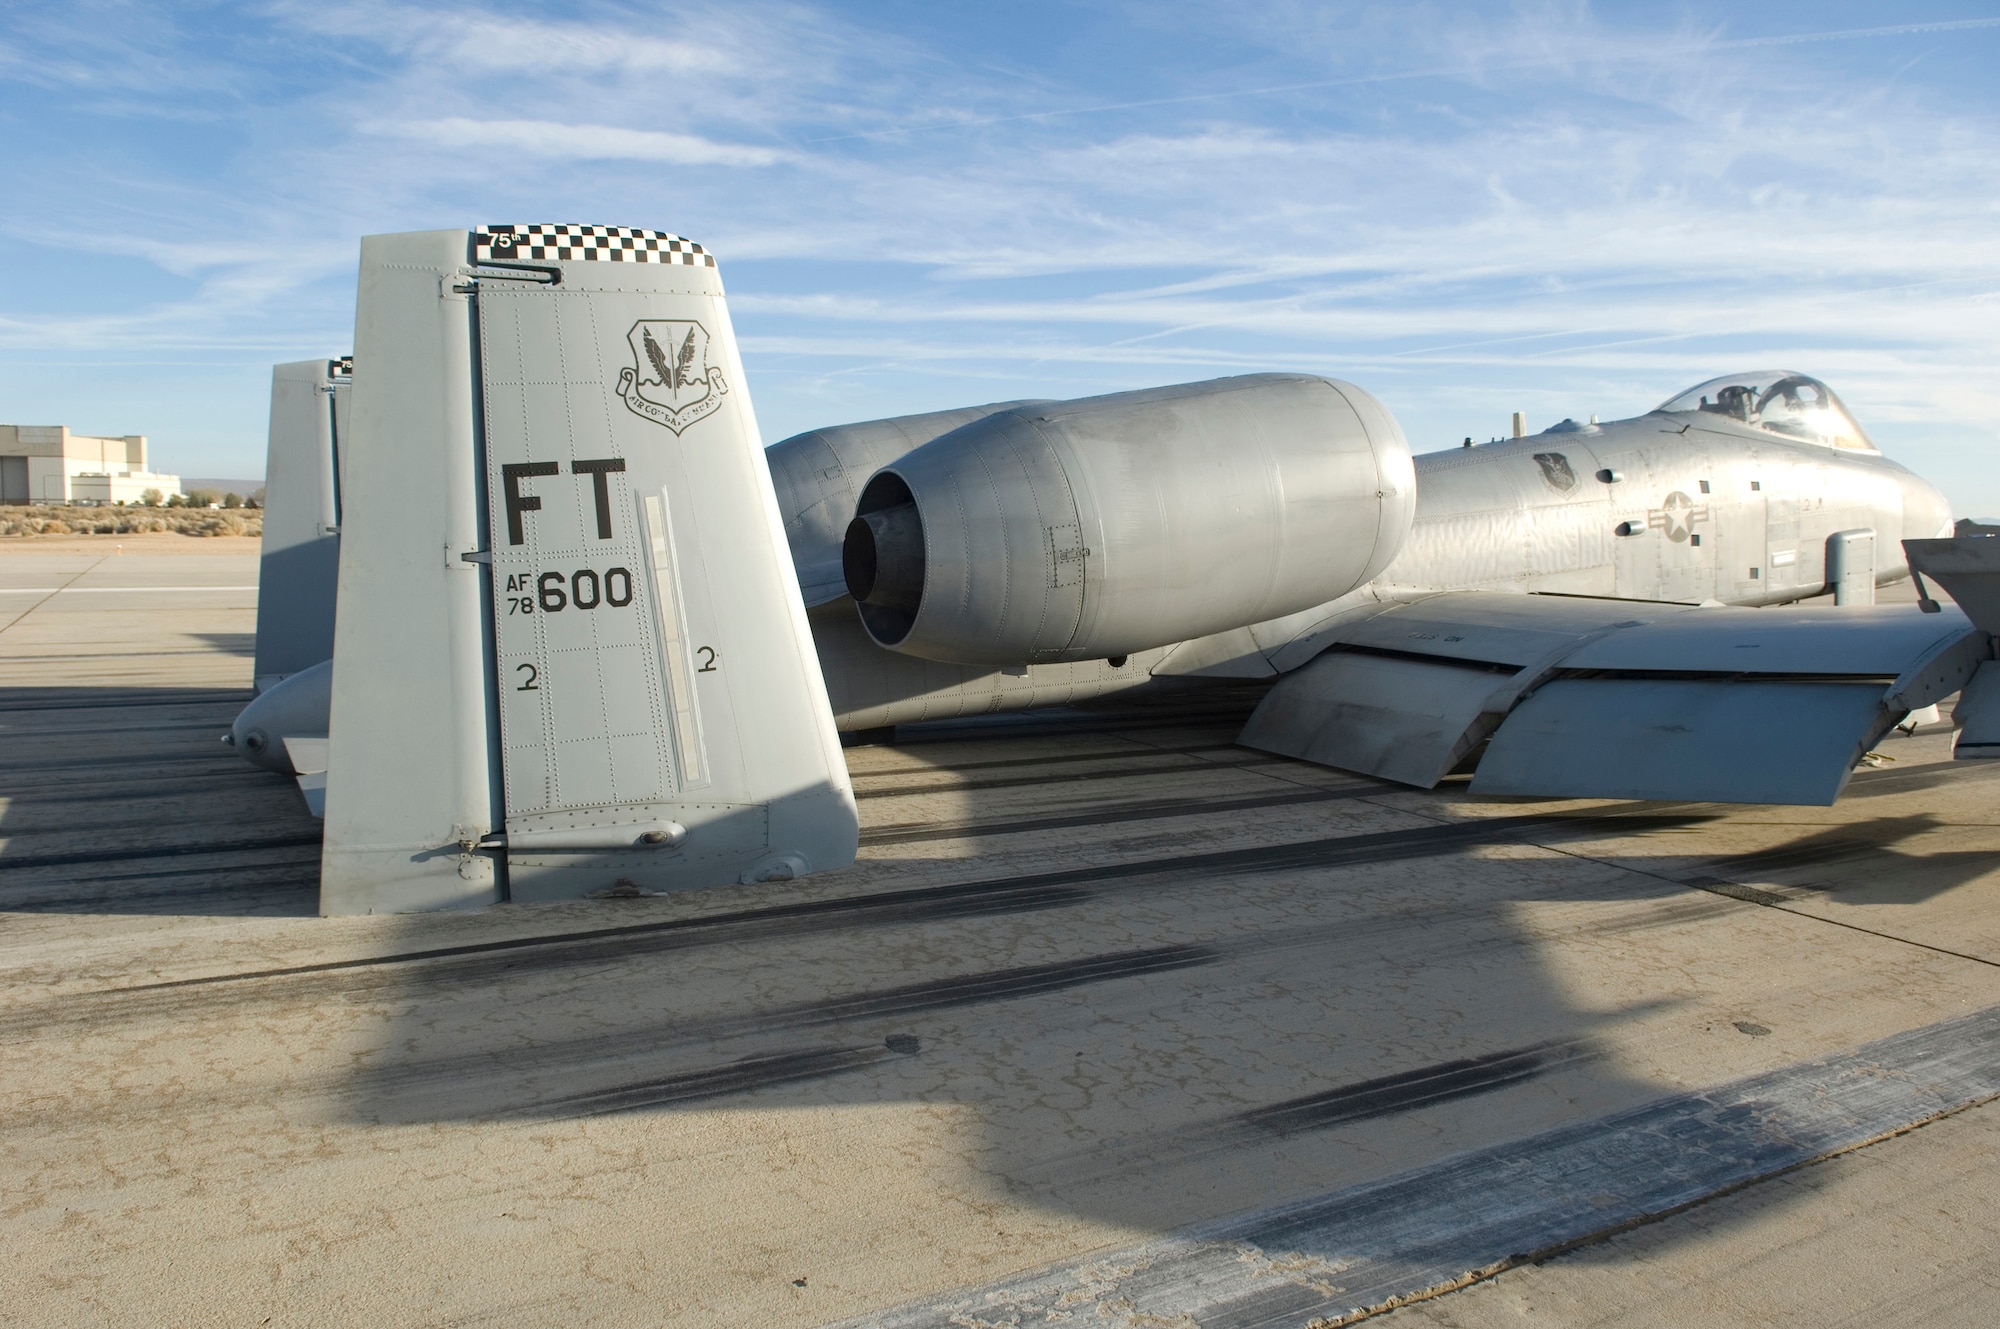 The tail section of an A-10 from the 75th Fighter Squadron at Moody Air Force Base, Ga., makes direct contact with Runway 22 after making an emergency landing here Tuesday. The A-10 landed at Edwards with its landing gear in the up position after declaring an in-flight emergency. (Air Force photo by Brad White)